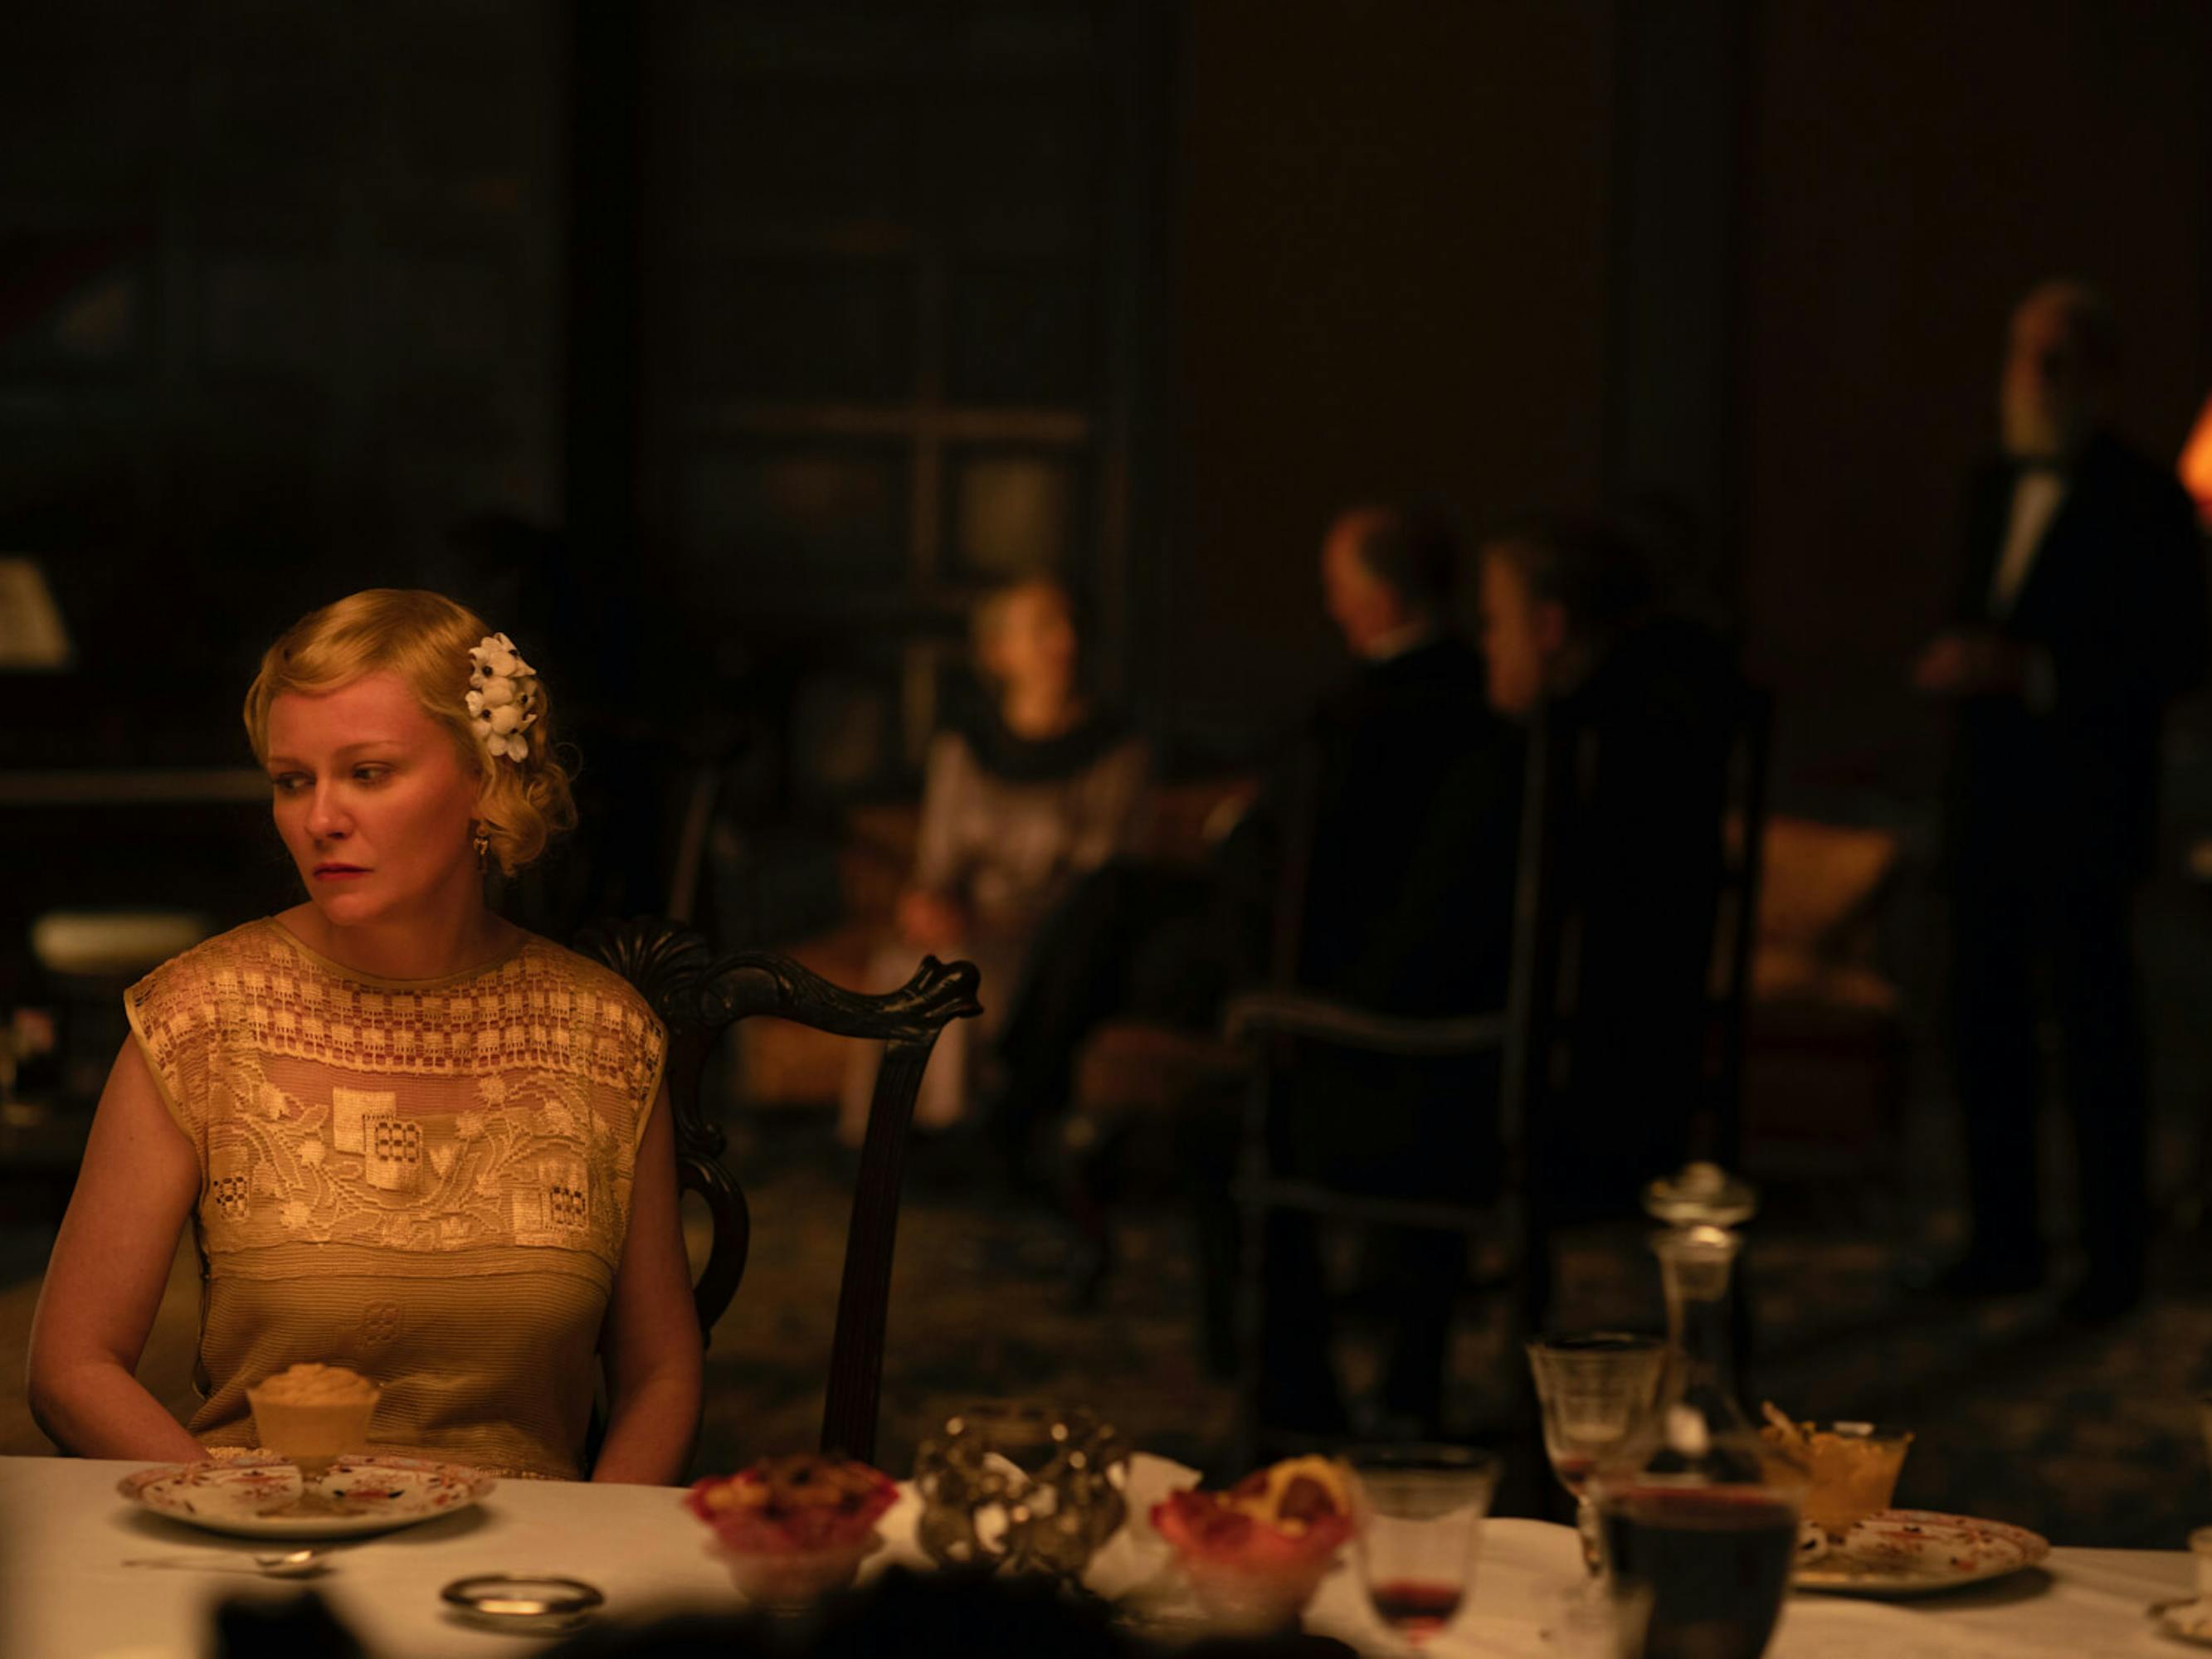 Rose (Kirsten Dunst) wears a beautiful white dress and white hair accessory looking morose. In front of her is an elegant glass holding desert.